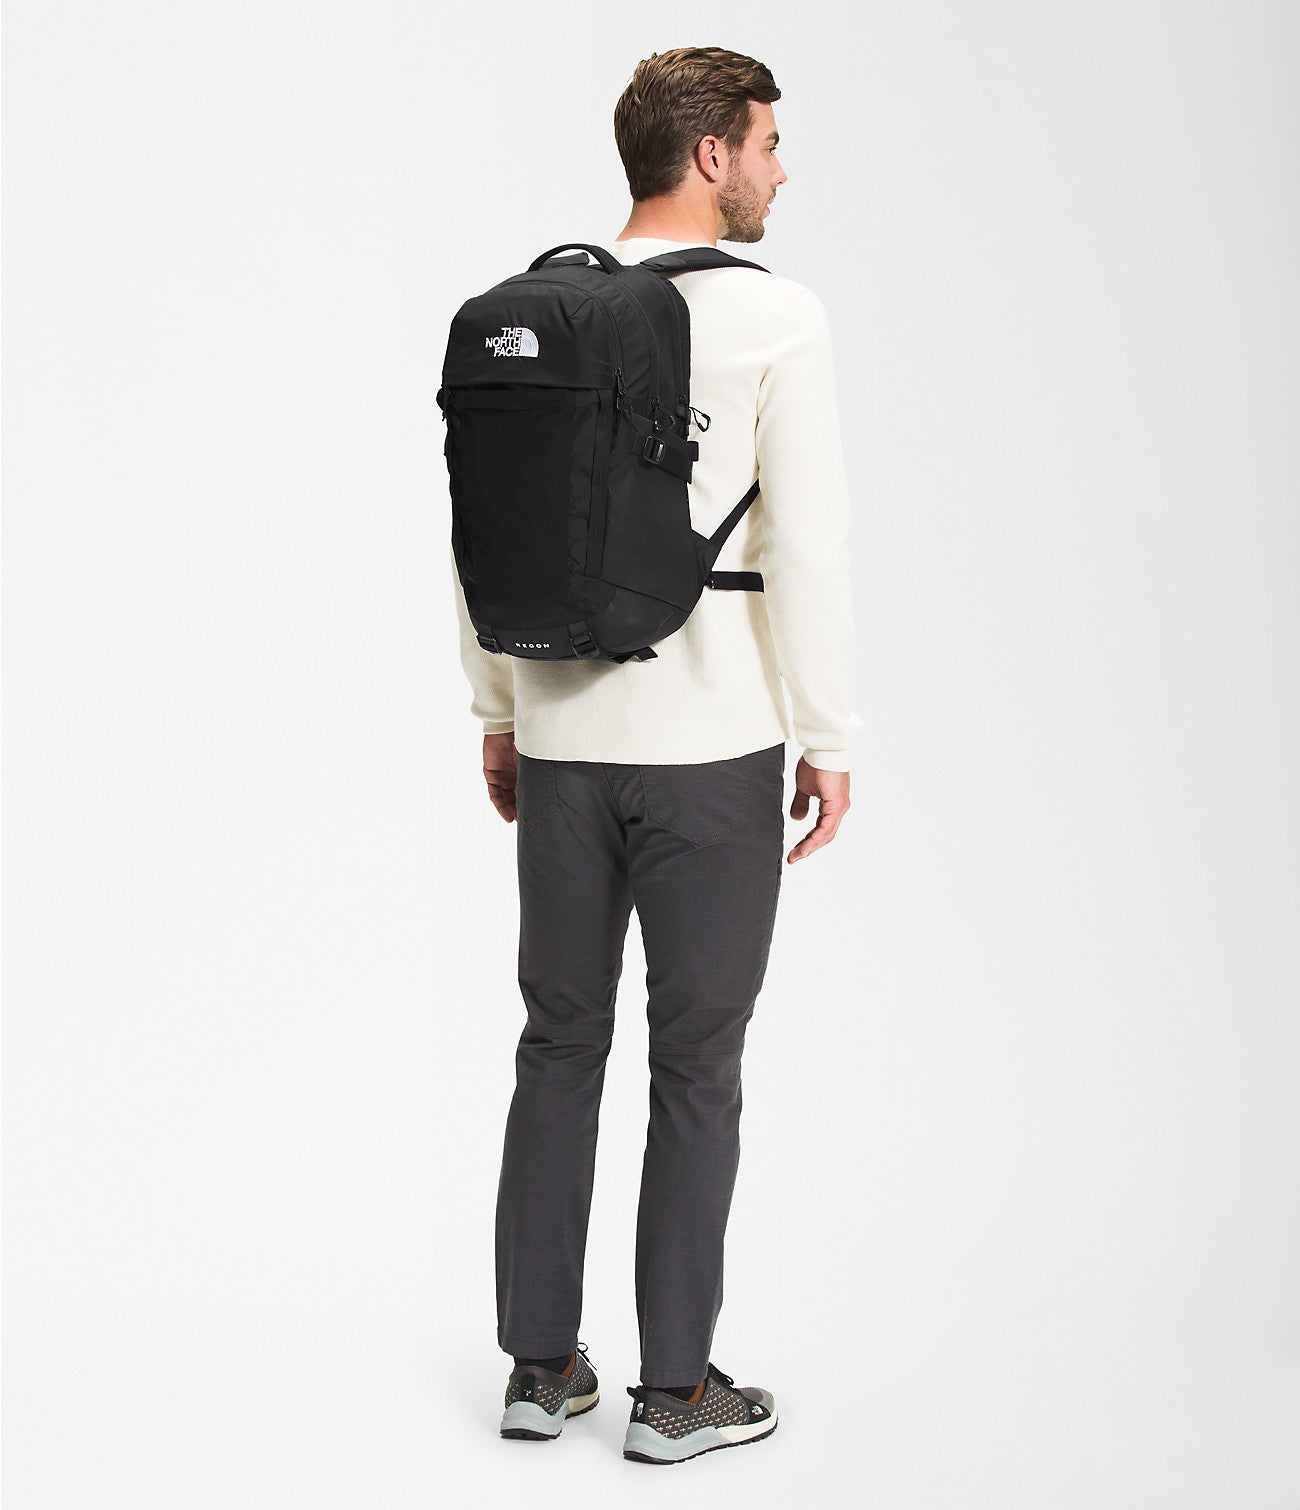 The North Face Recon Backpack – OutdoorsInc.com